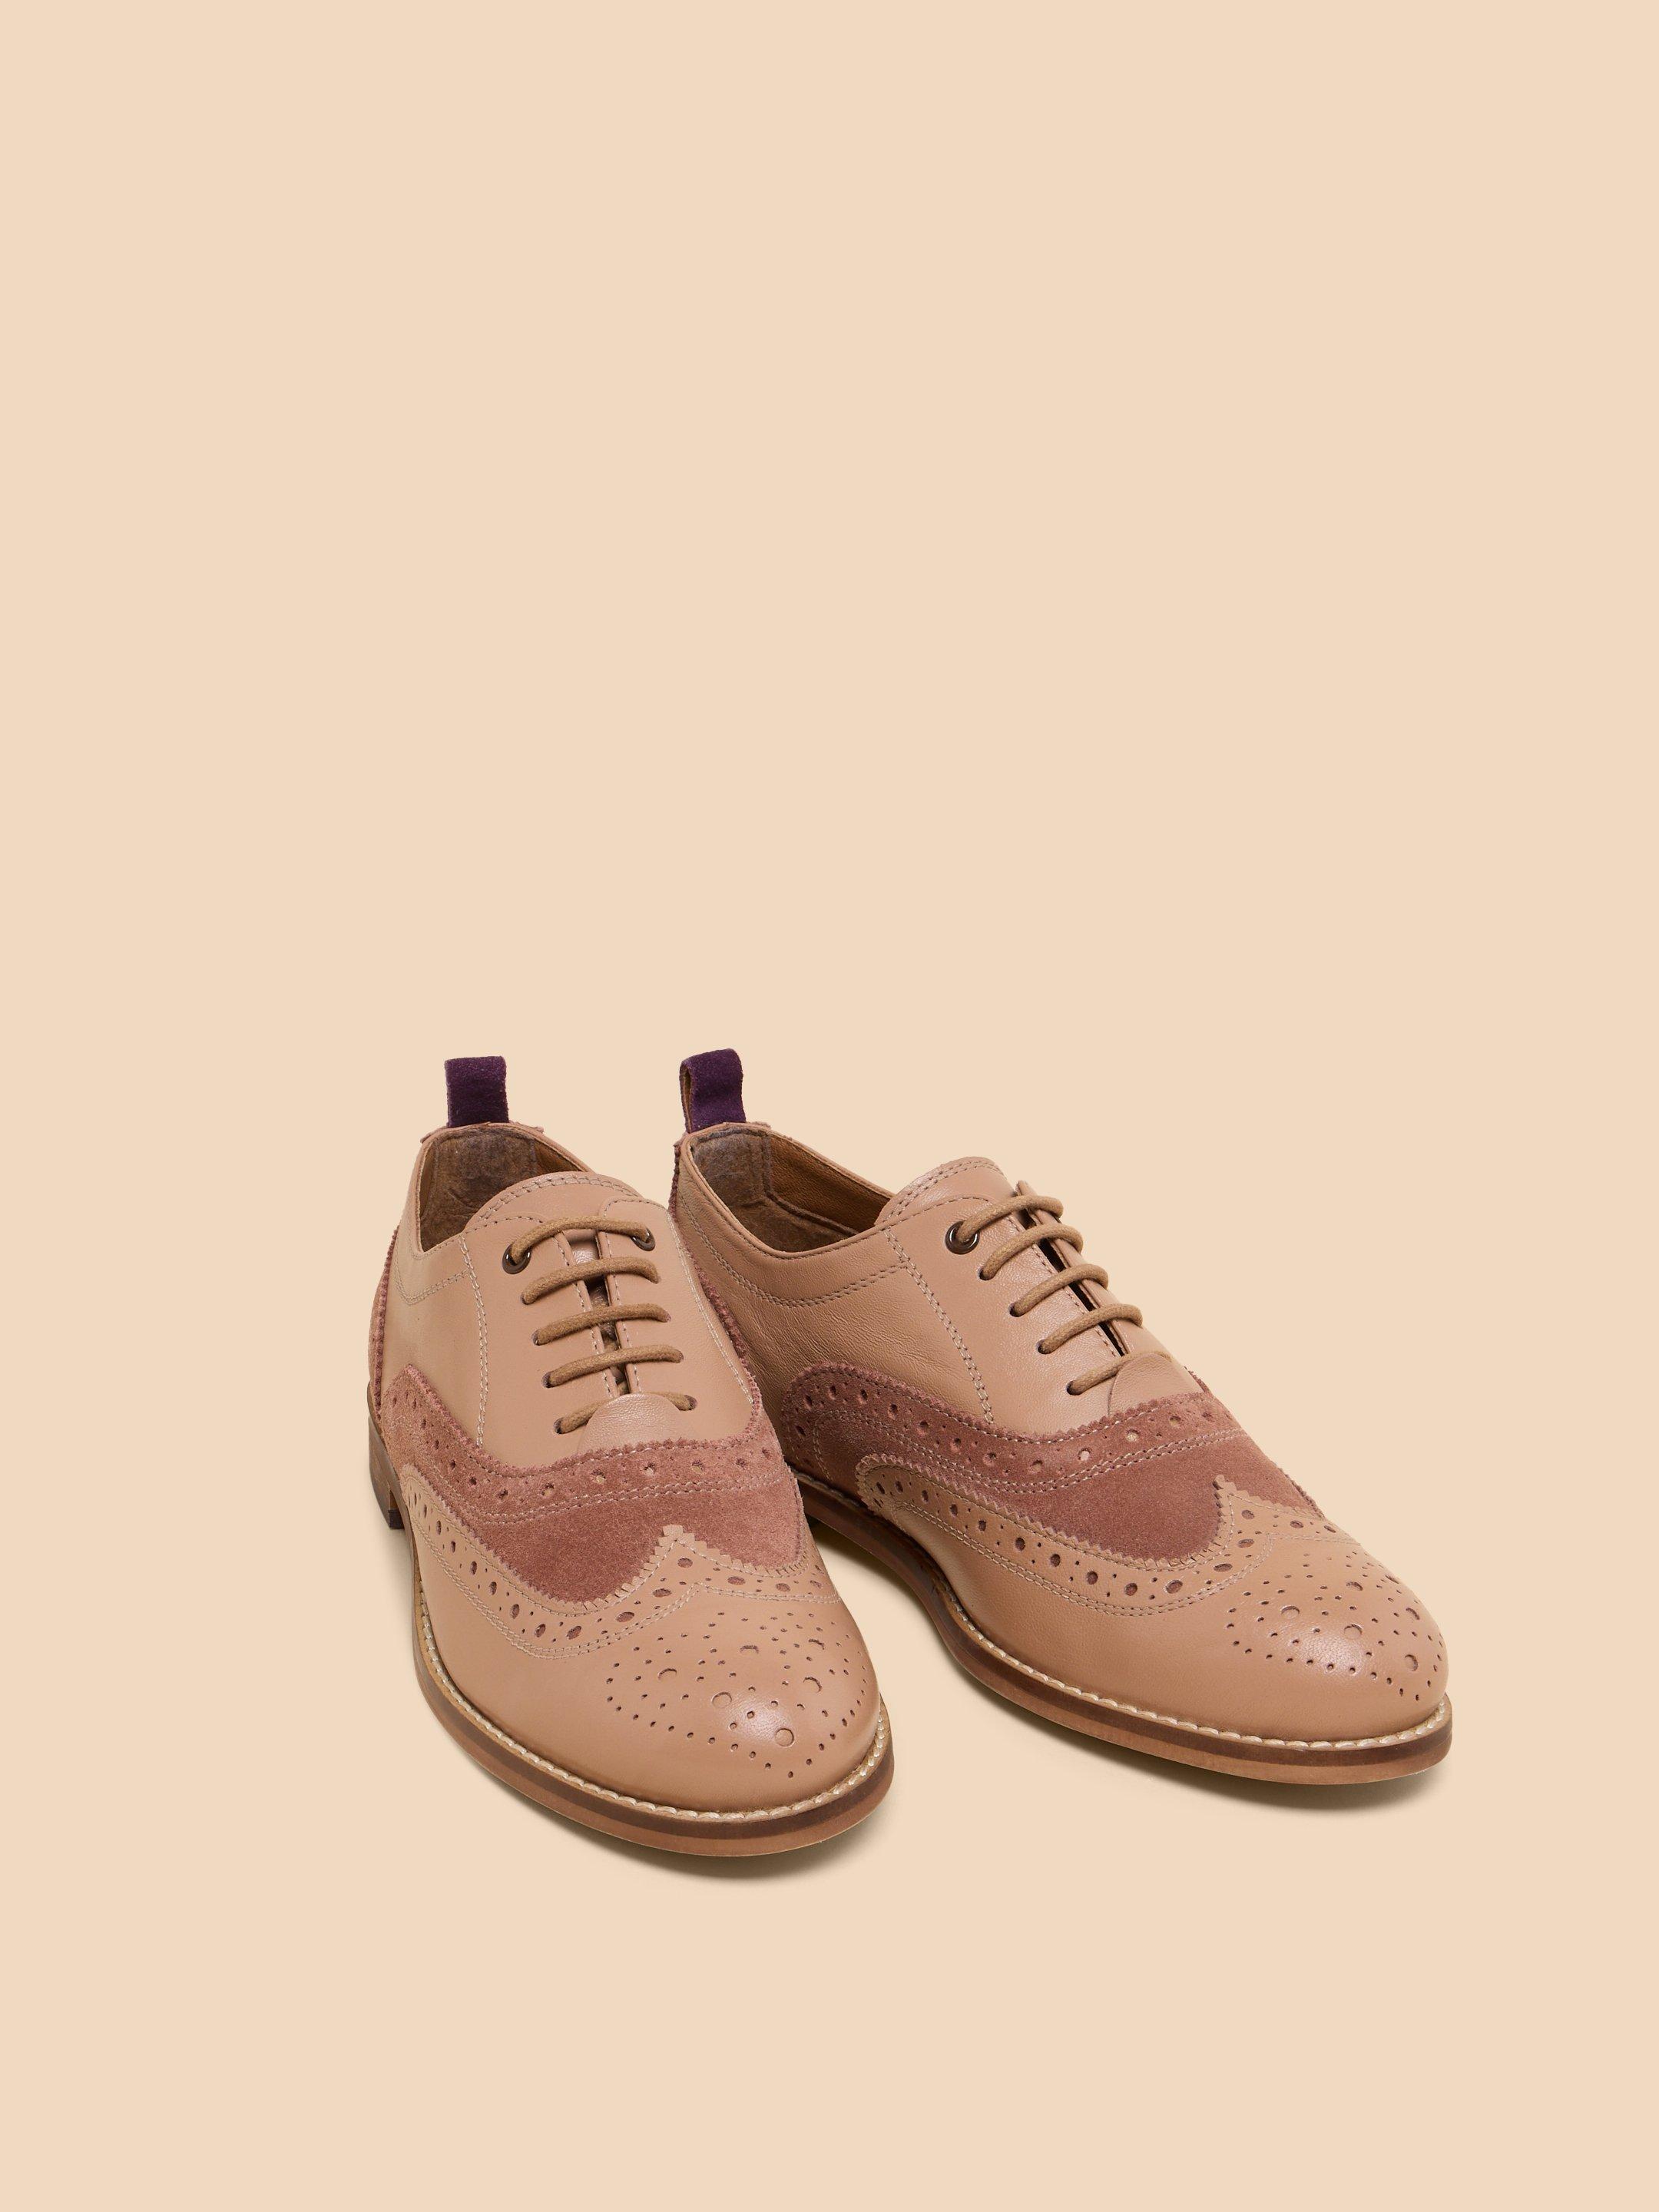 Thistle Lace Up Leather Brogue in MID PINK - FLAT FRONT